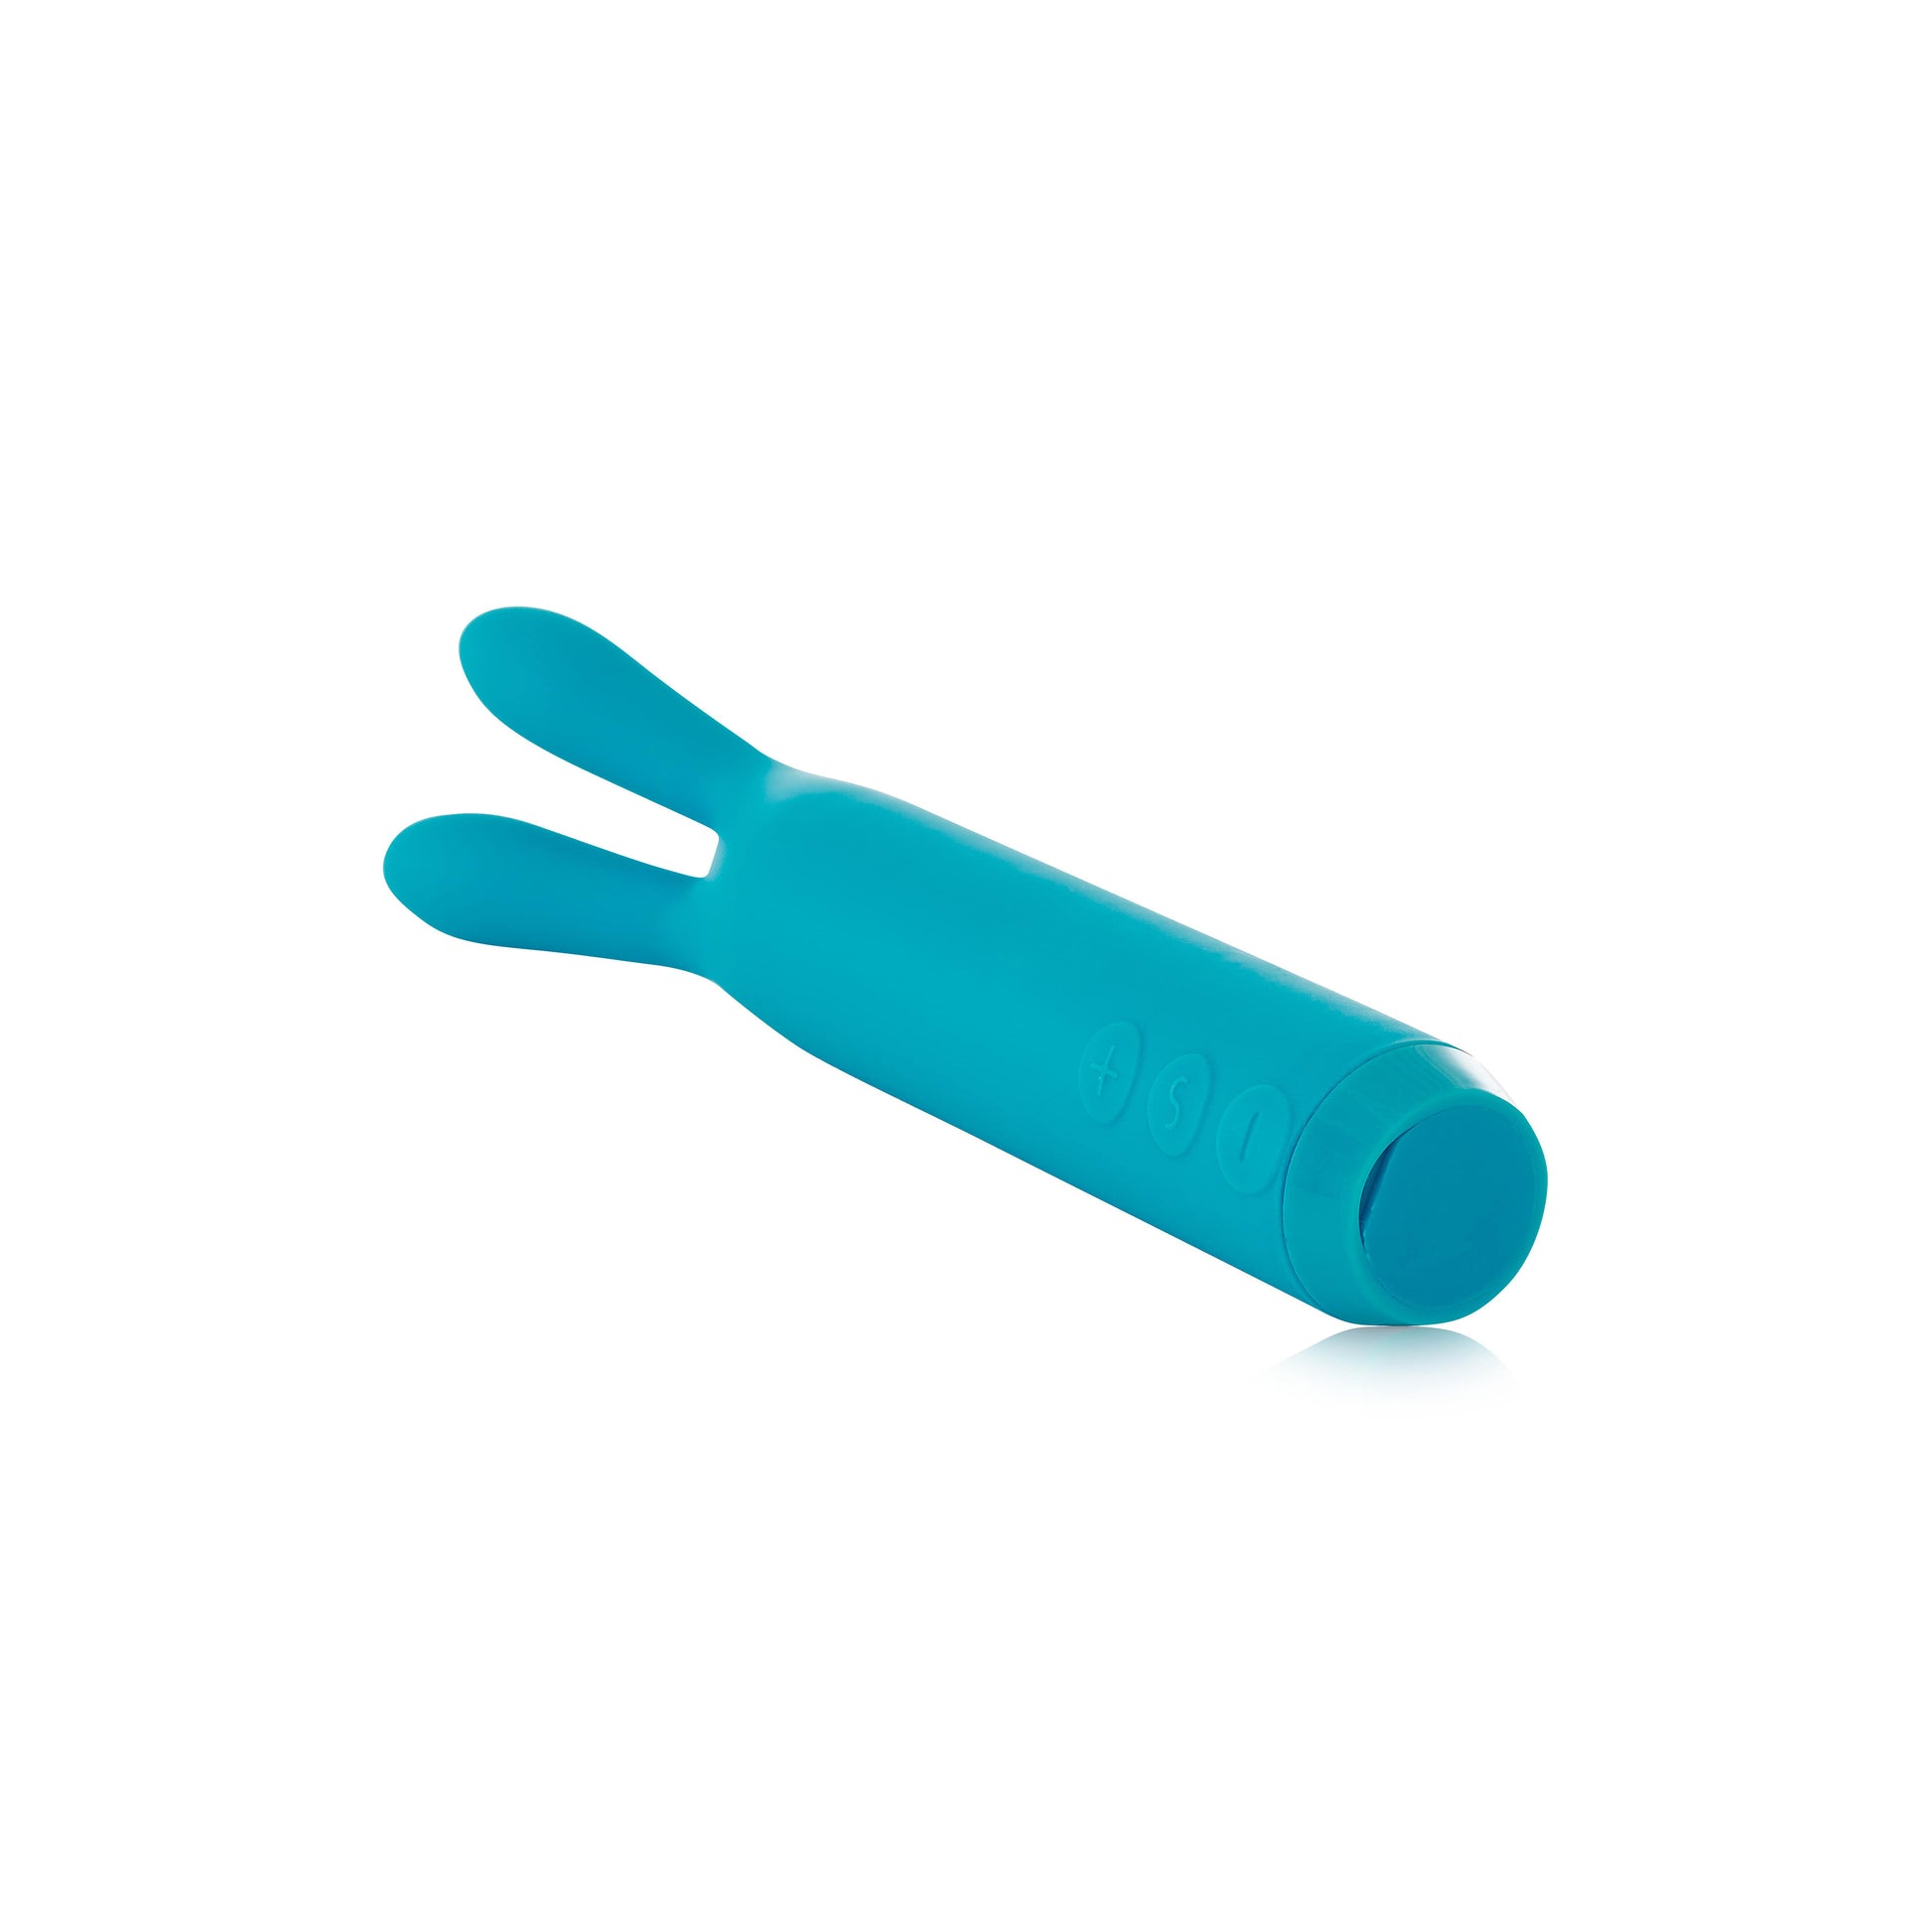 Rabbit Bullet Vibrator in teal side view